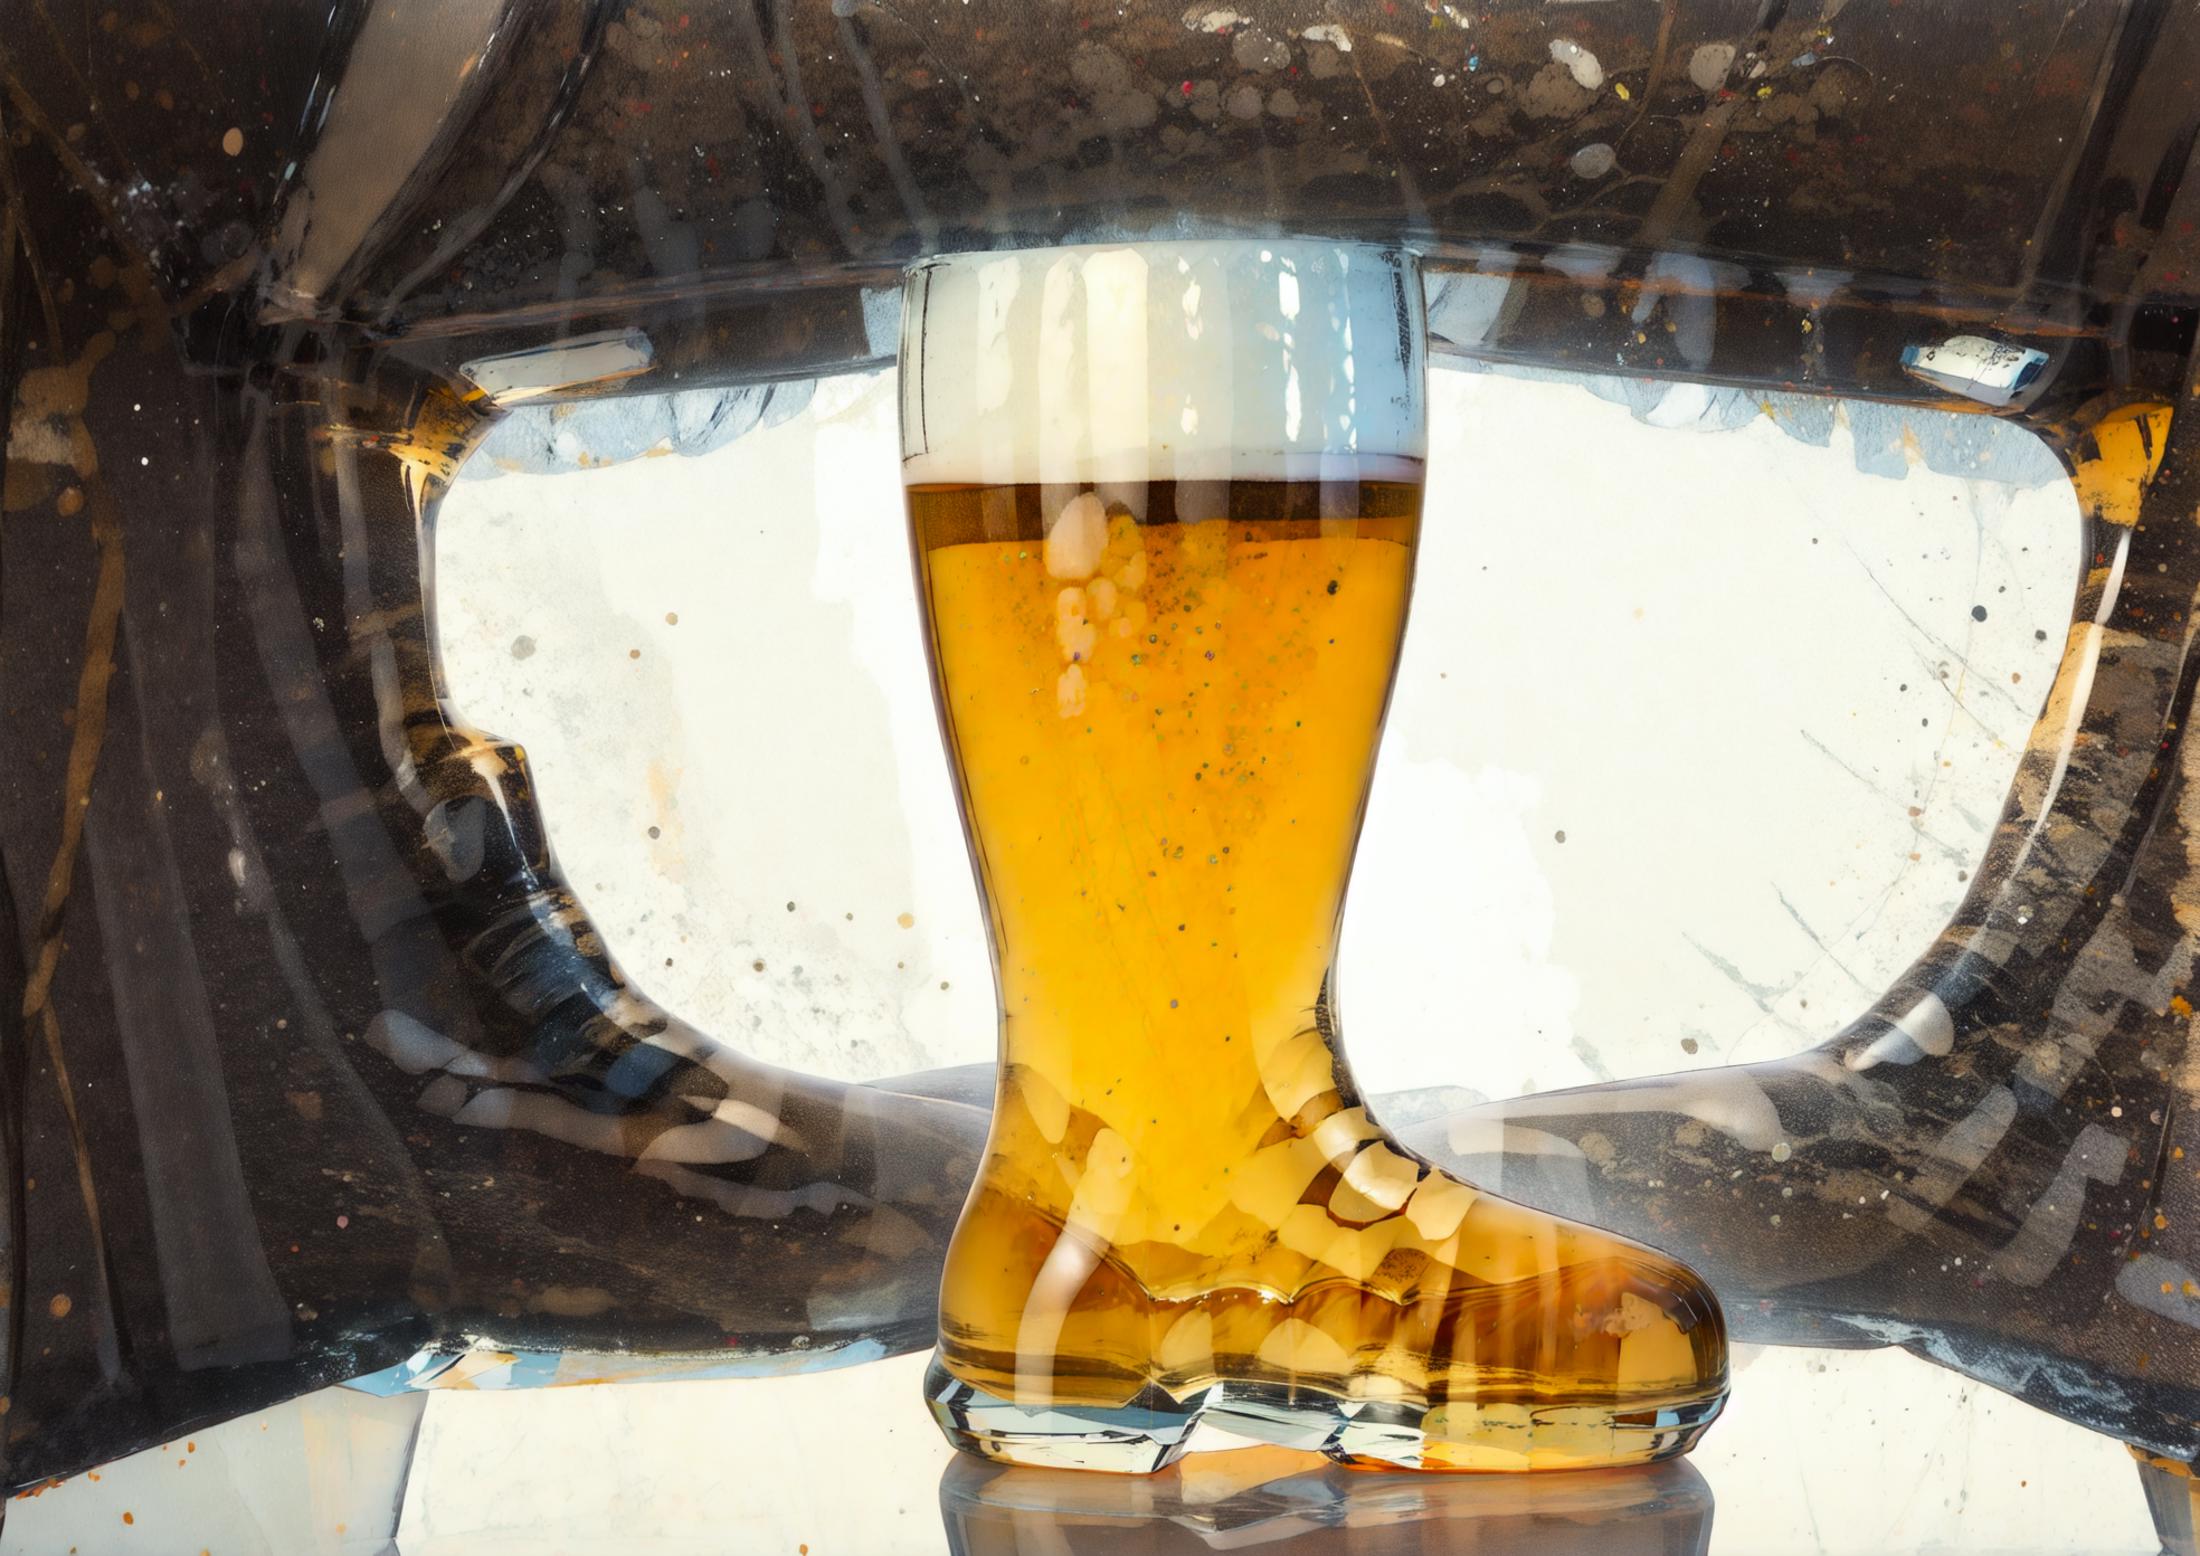 das beer boot image by catchmoon